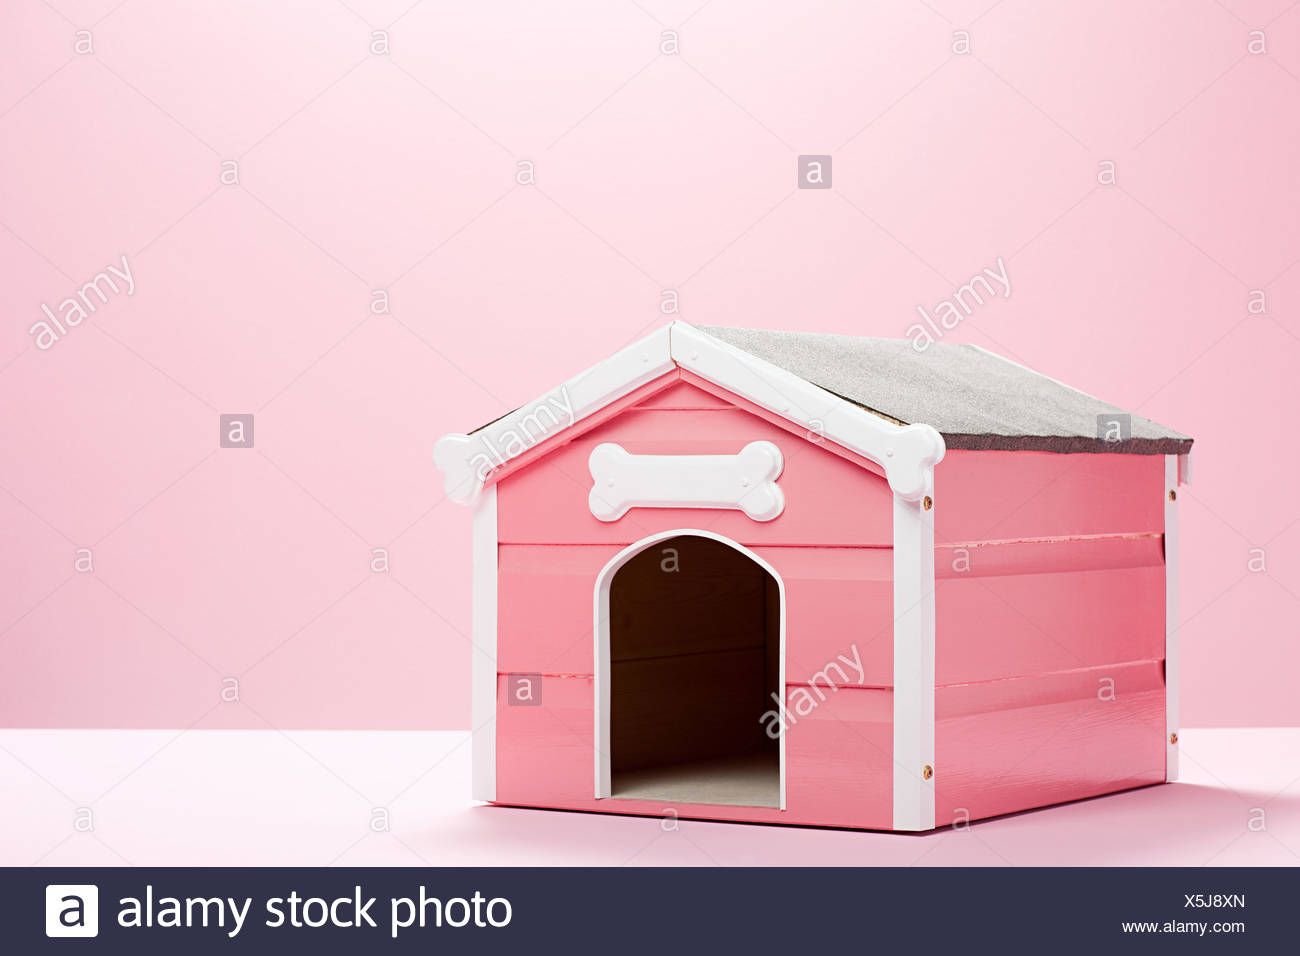 Kennel Stock Photos & Kennel Stock Images - Alamy